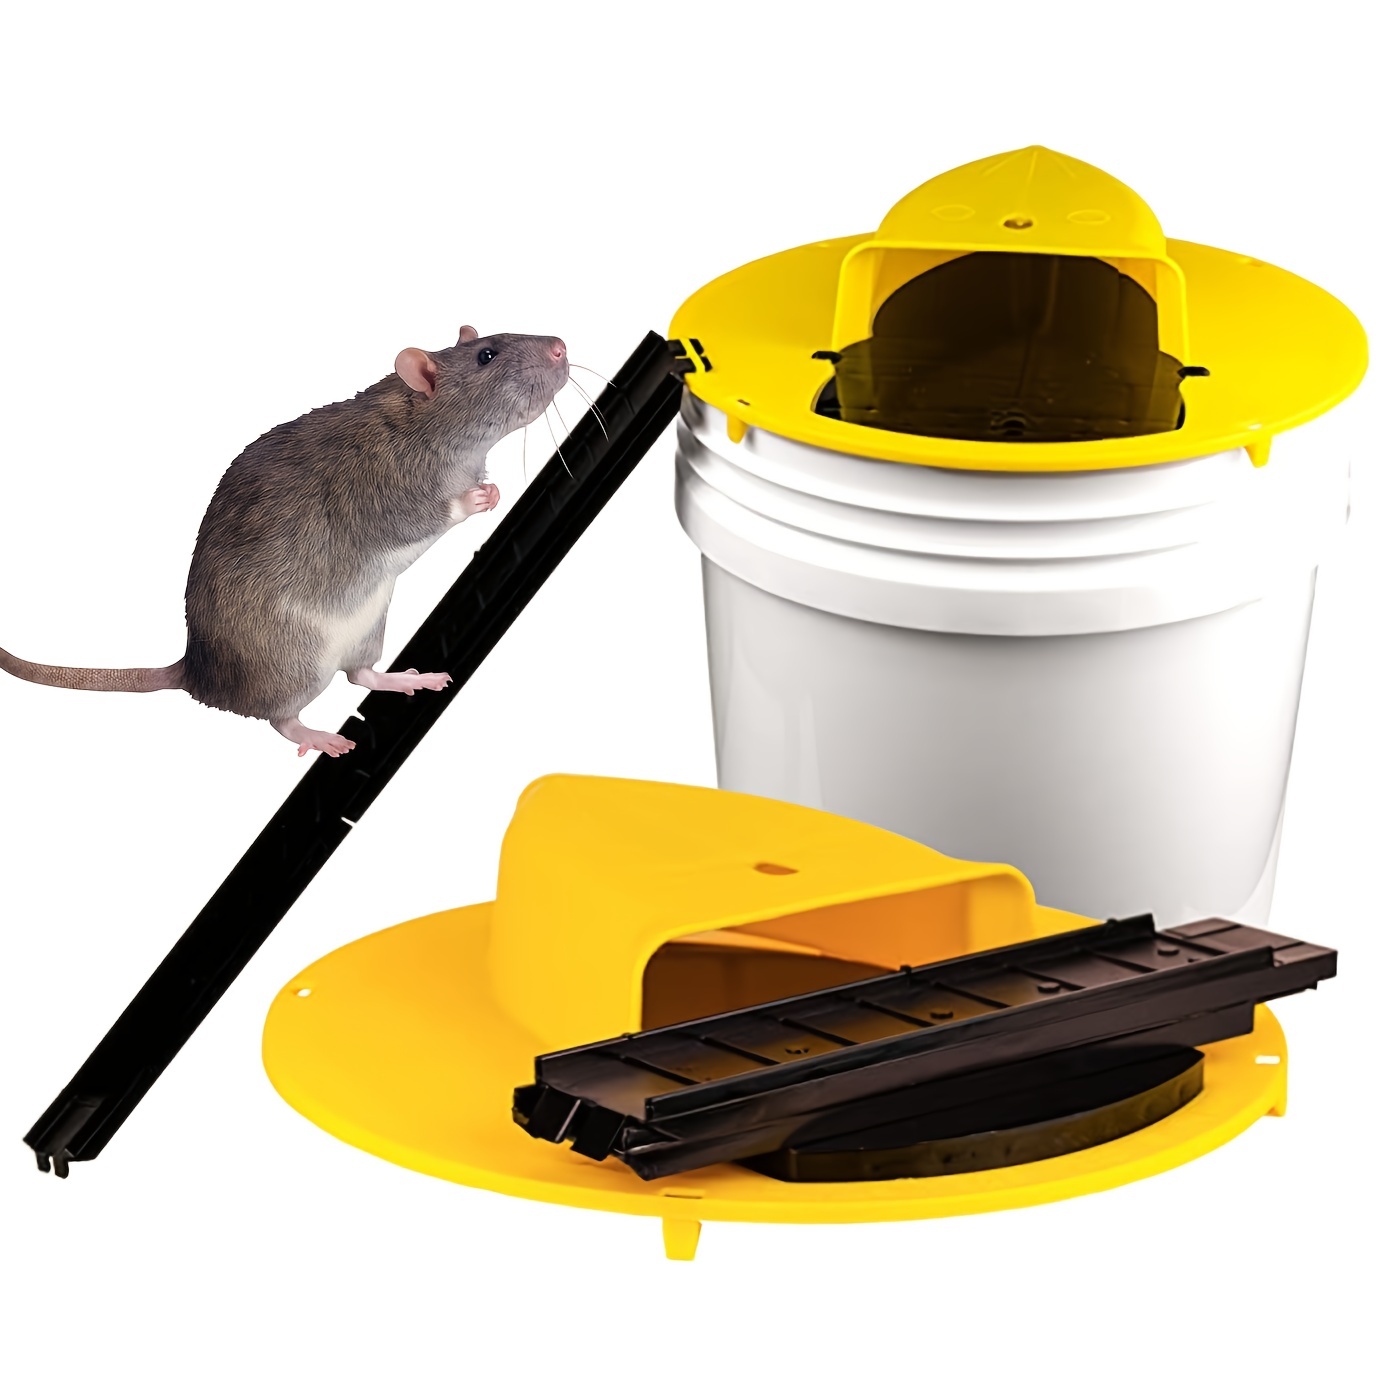 How To Build A Self-Resetting Mouse Trap  Mouse traps, Bucket mouse trap,  Building a chicken coop